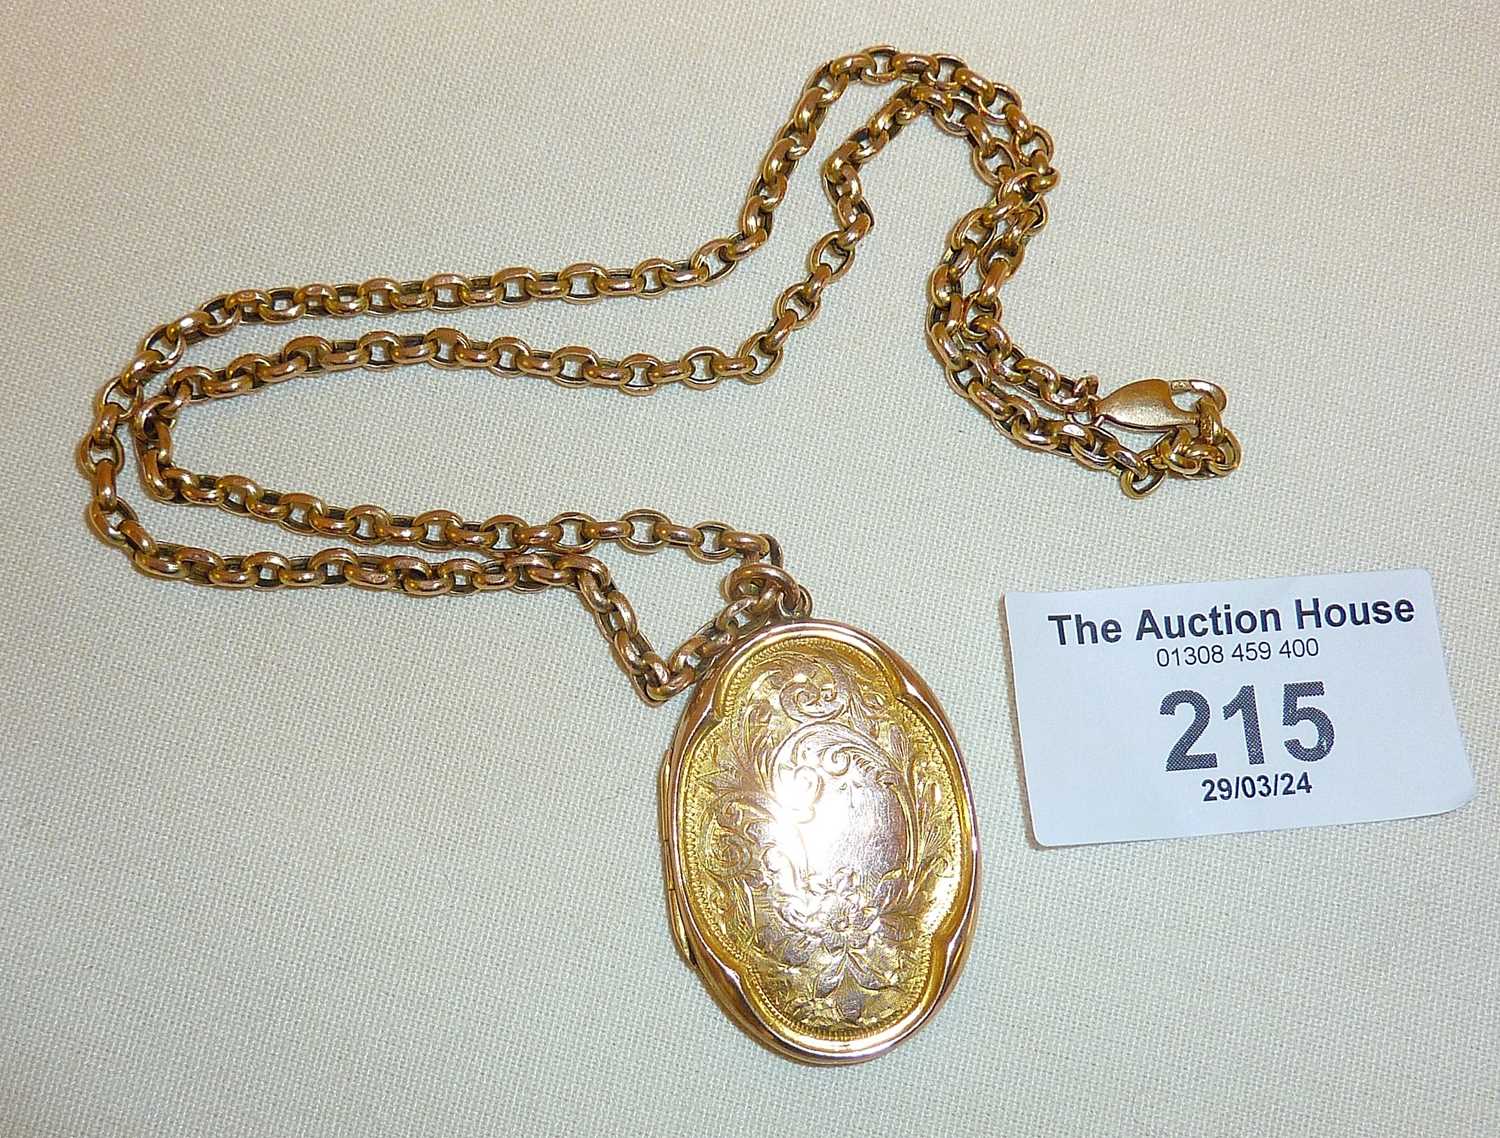 9ct gold belcher chain with 9ct gold gront and back locket. Chain only approx. 5g and 44cm long